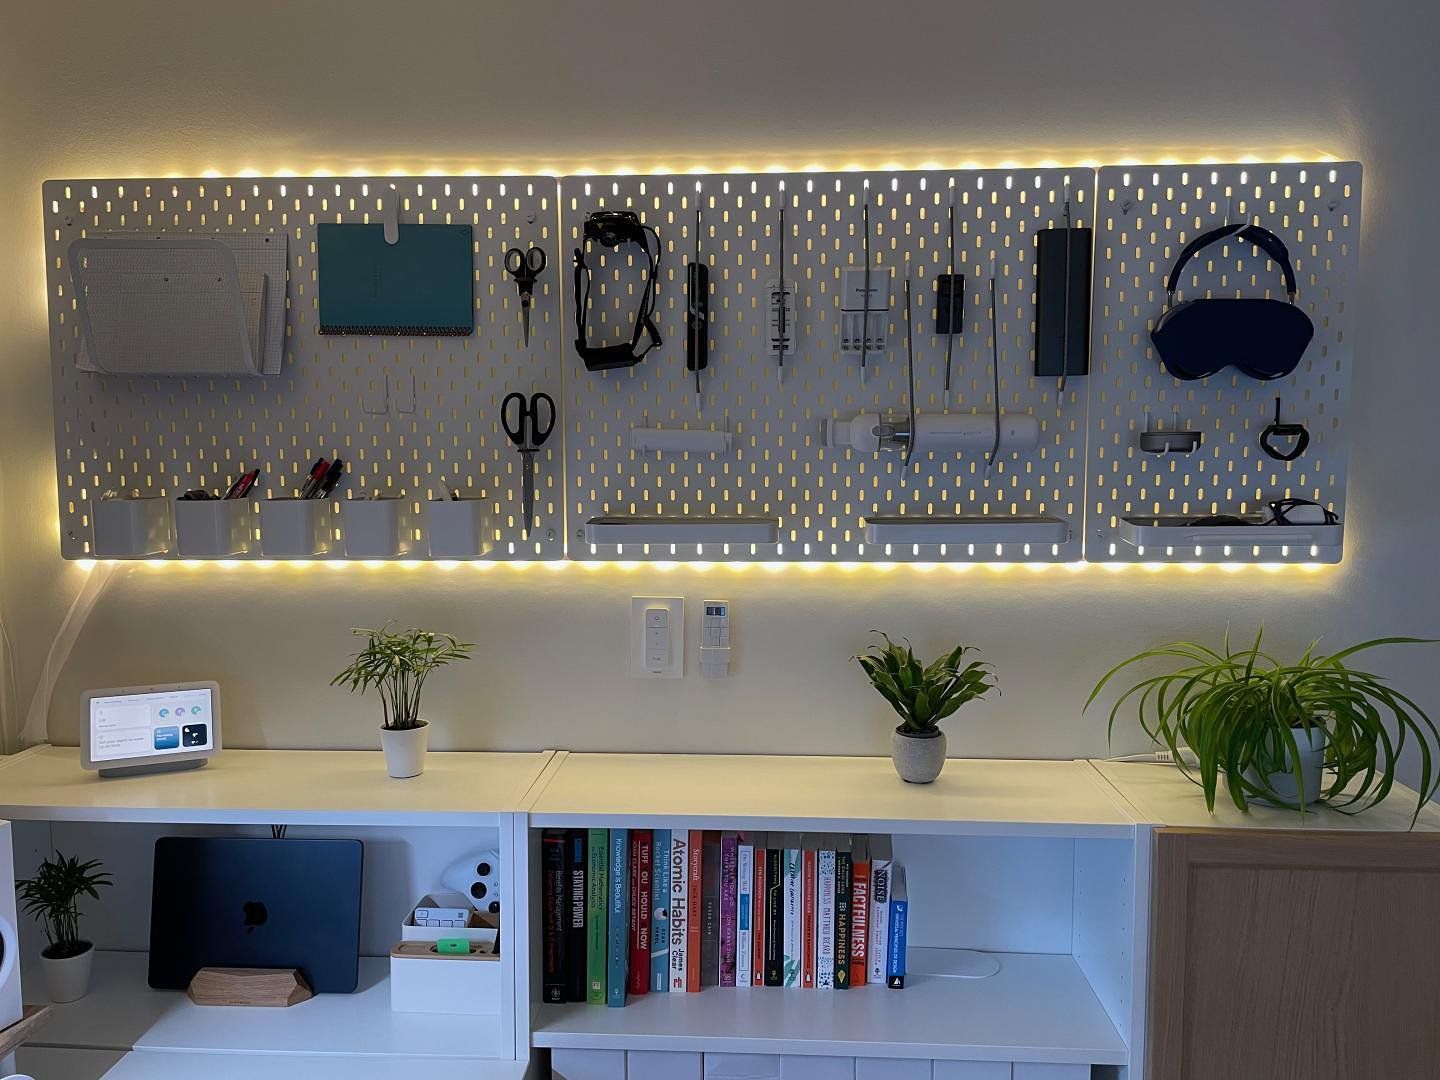 A corner of a minimalistic home office with three pegboards hanging on the wall next to each other